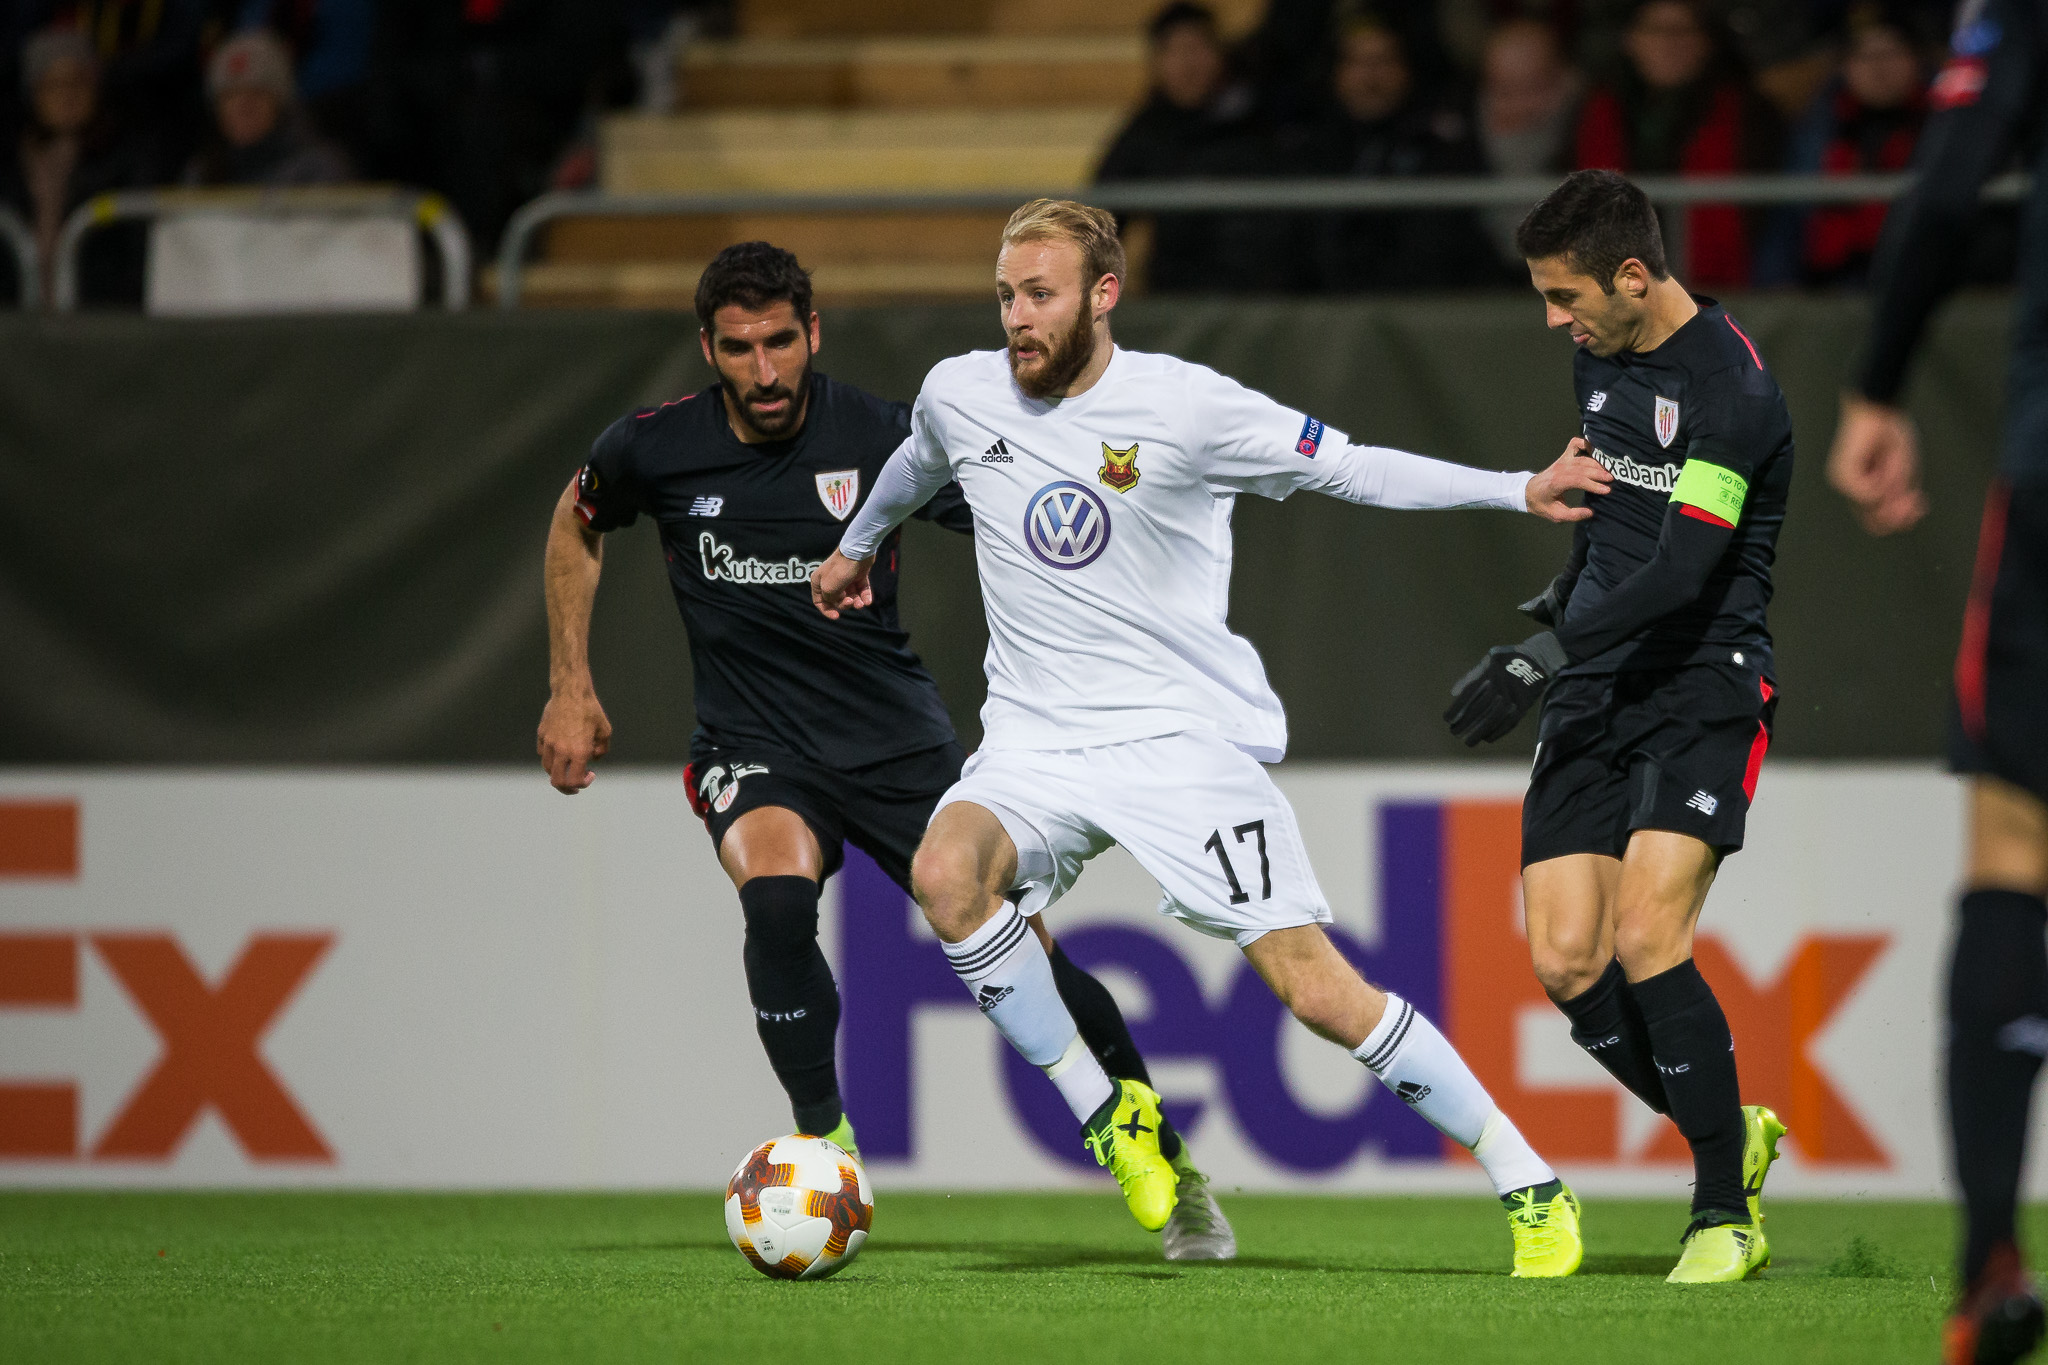 Ostersunds' Curtis Edwards playing against Athletic Bilbao (Johan Axelsson/Ostersunds)